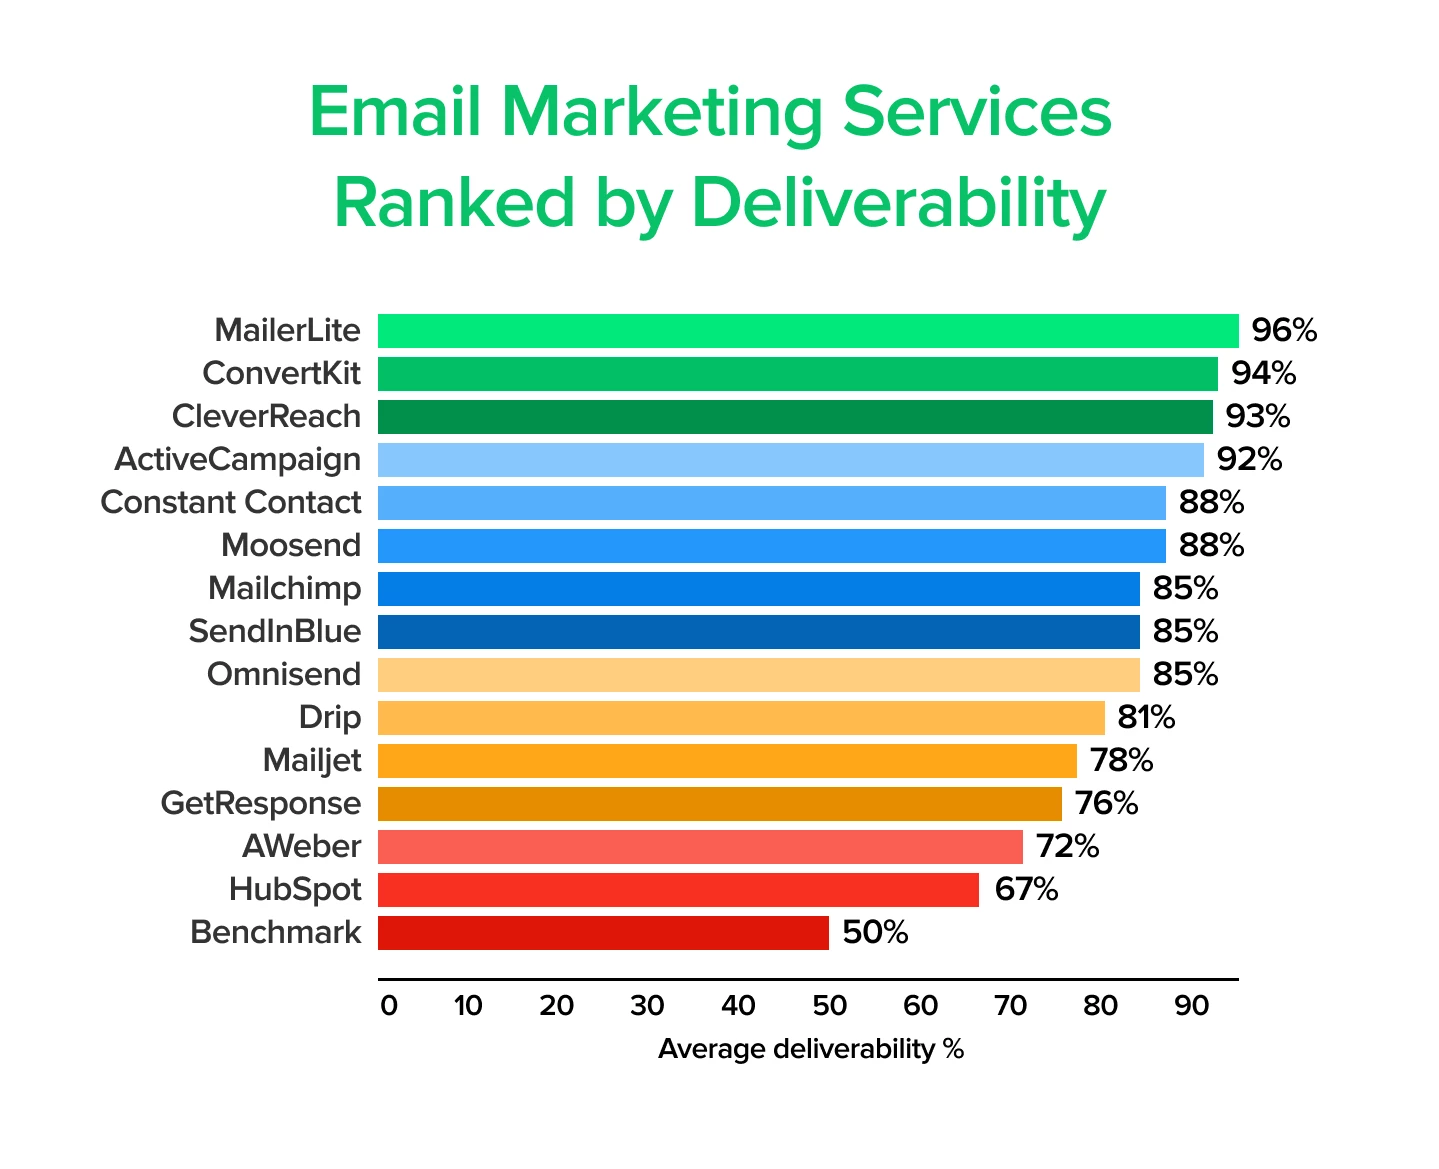 ESPs ranked by deliverability